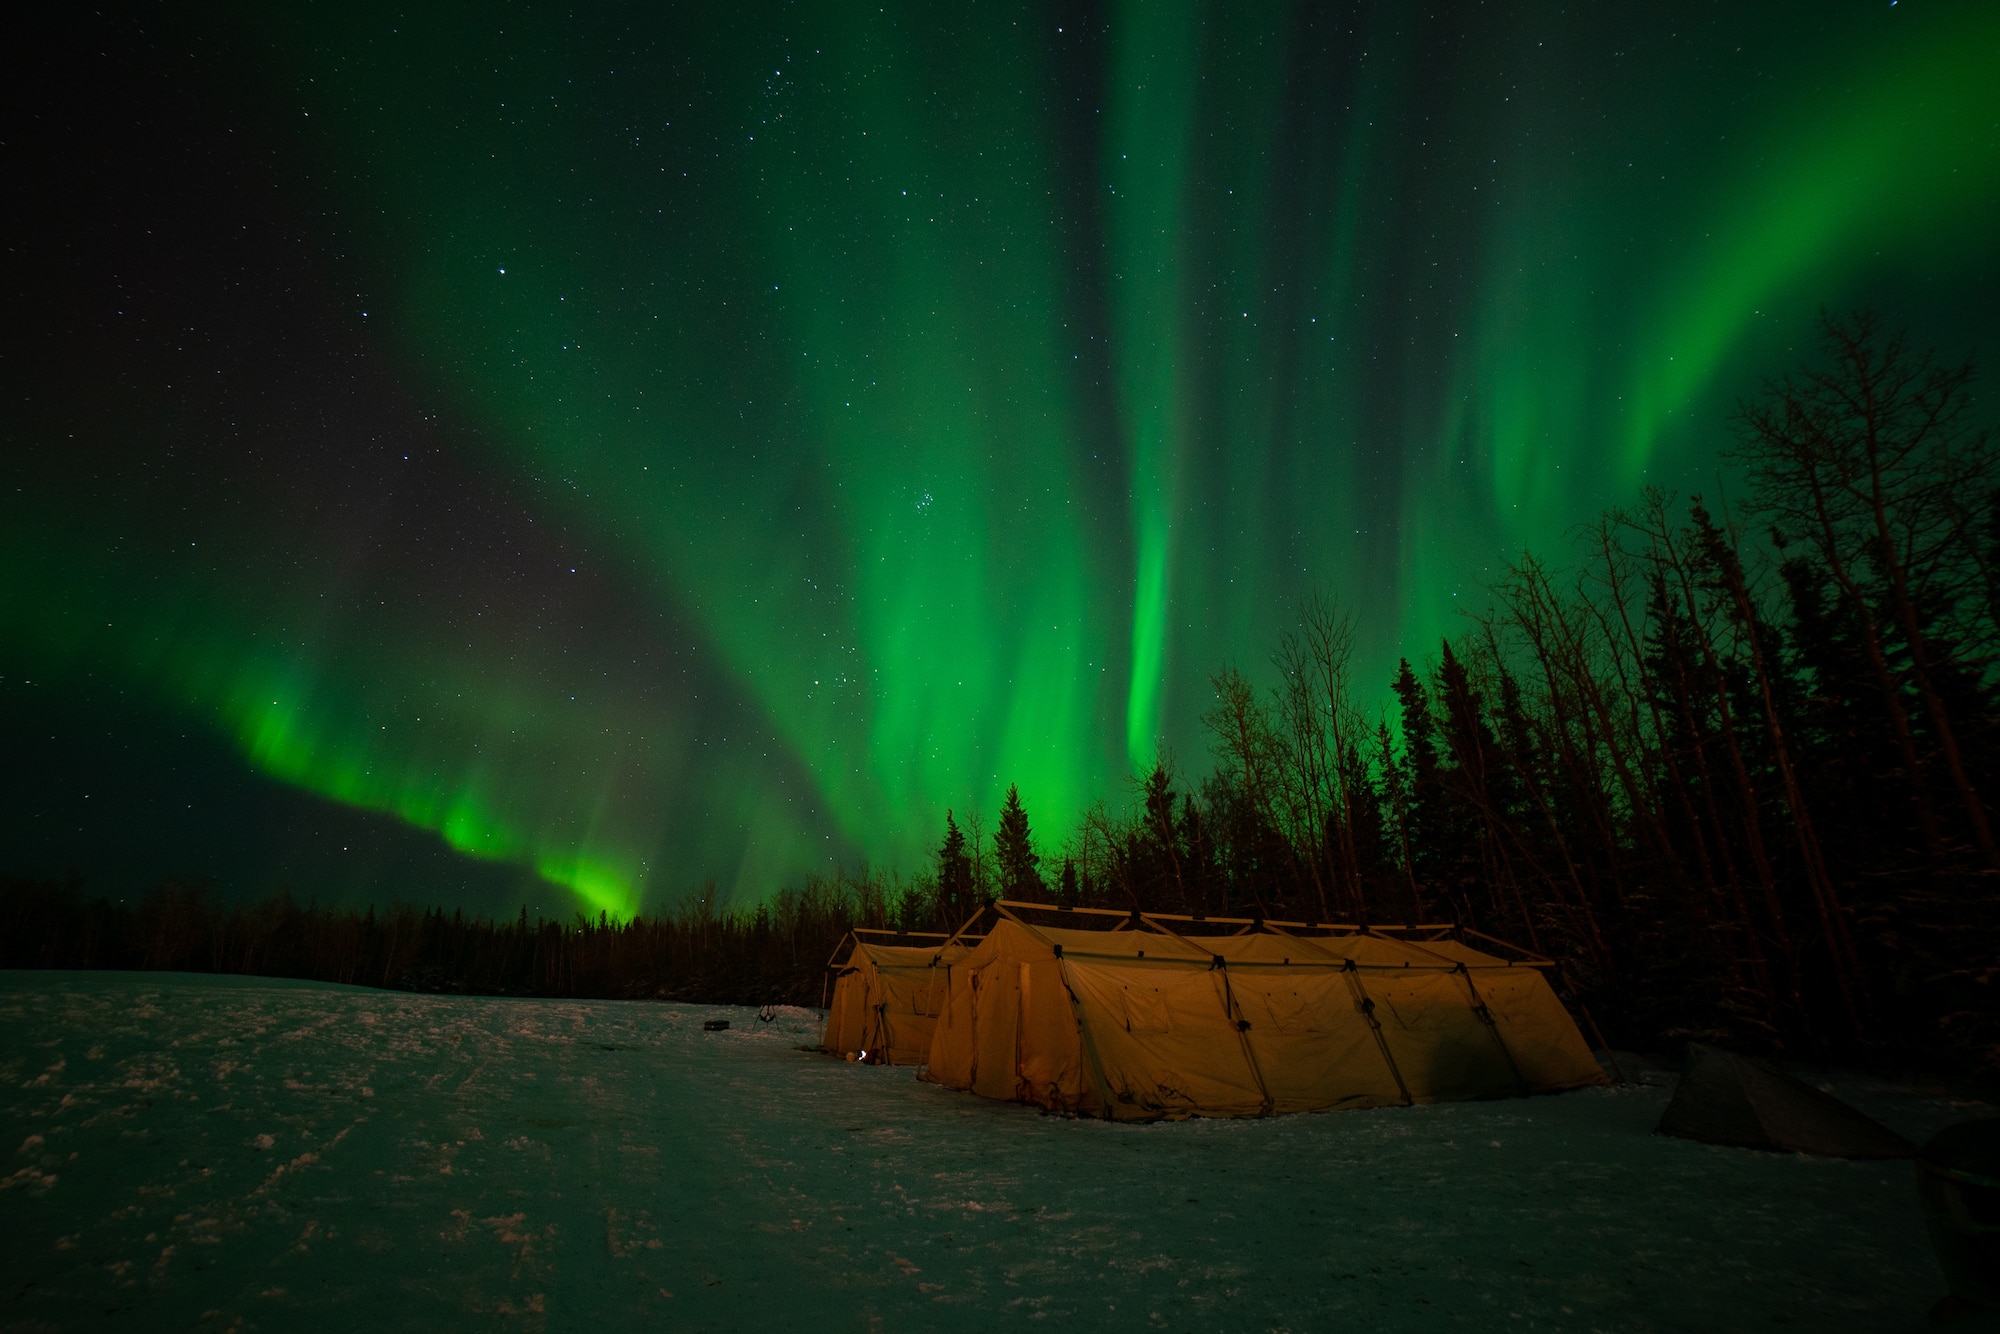 Green rays from the aurora borealis shine in the sky above a snow tree line, large military tents and snowy ground.